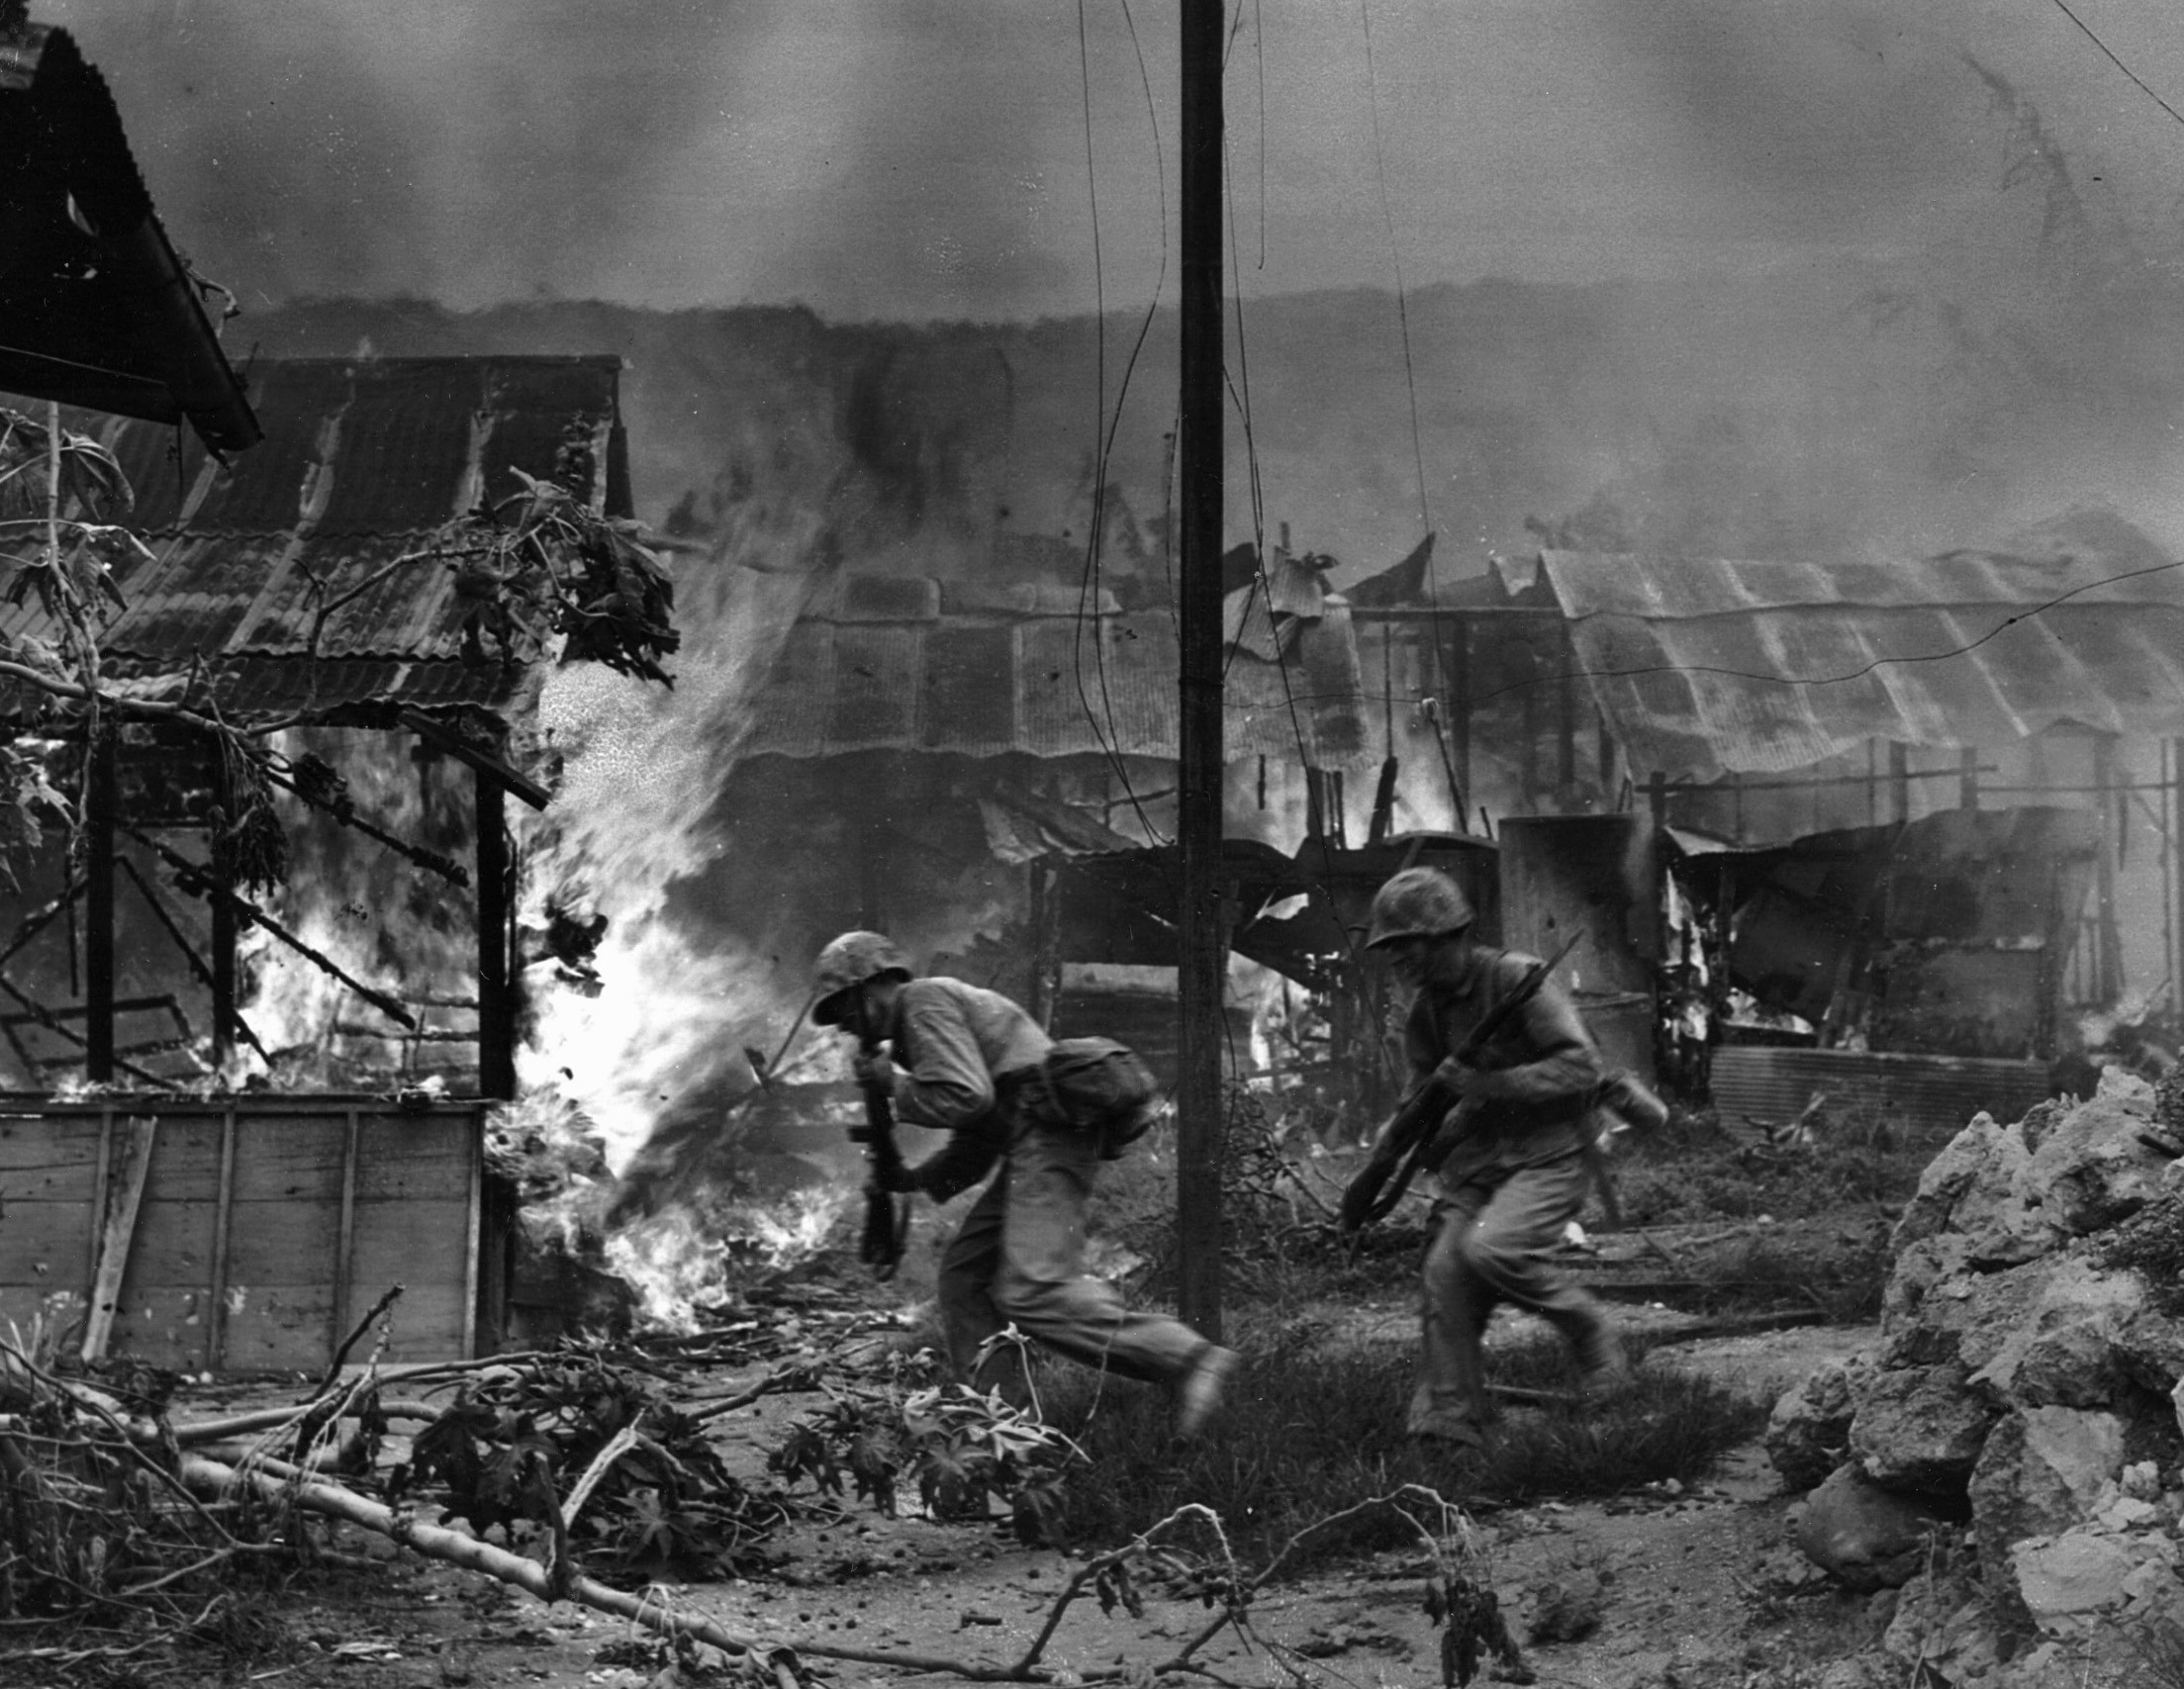 Enveloped in smoke and flame, Marines enter the town of Garapan on July 1, 1944.